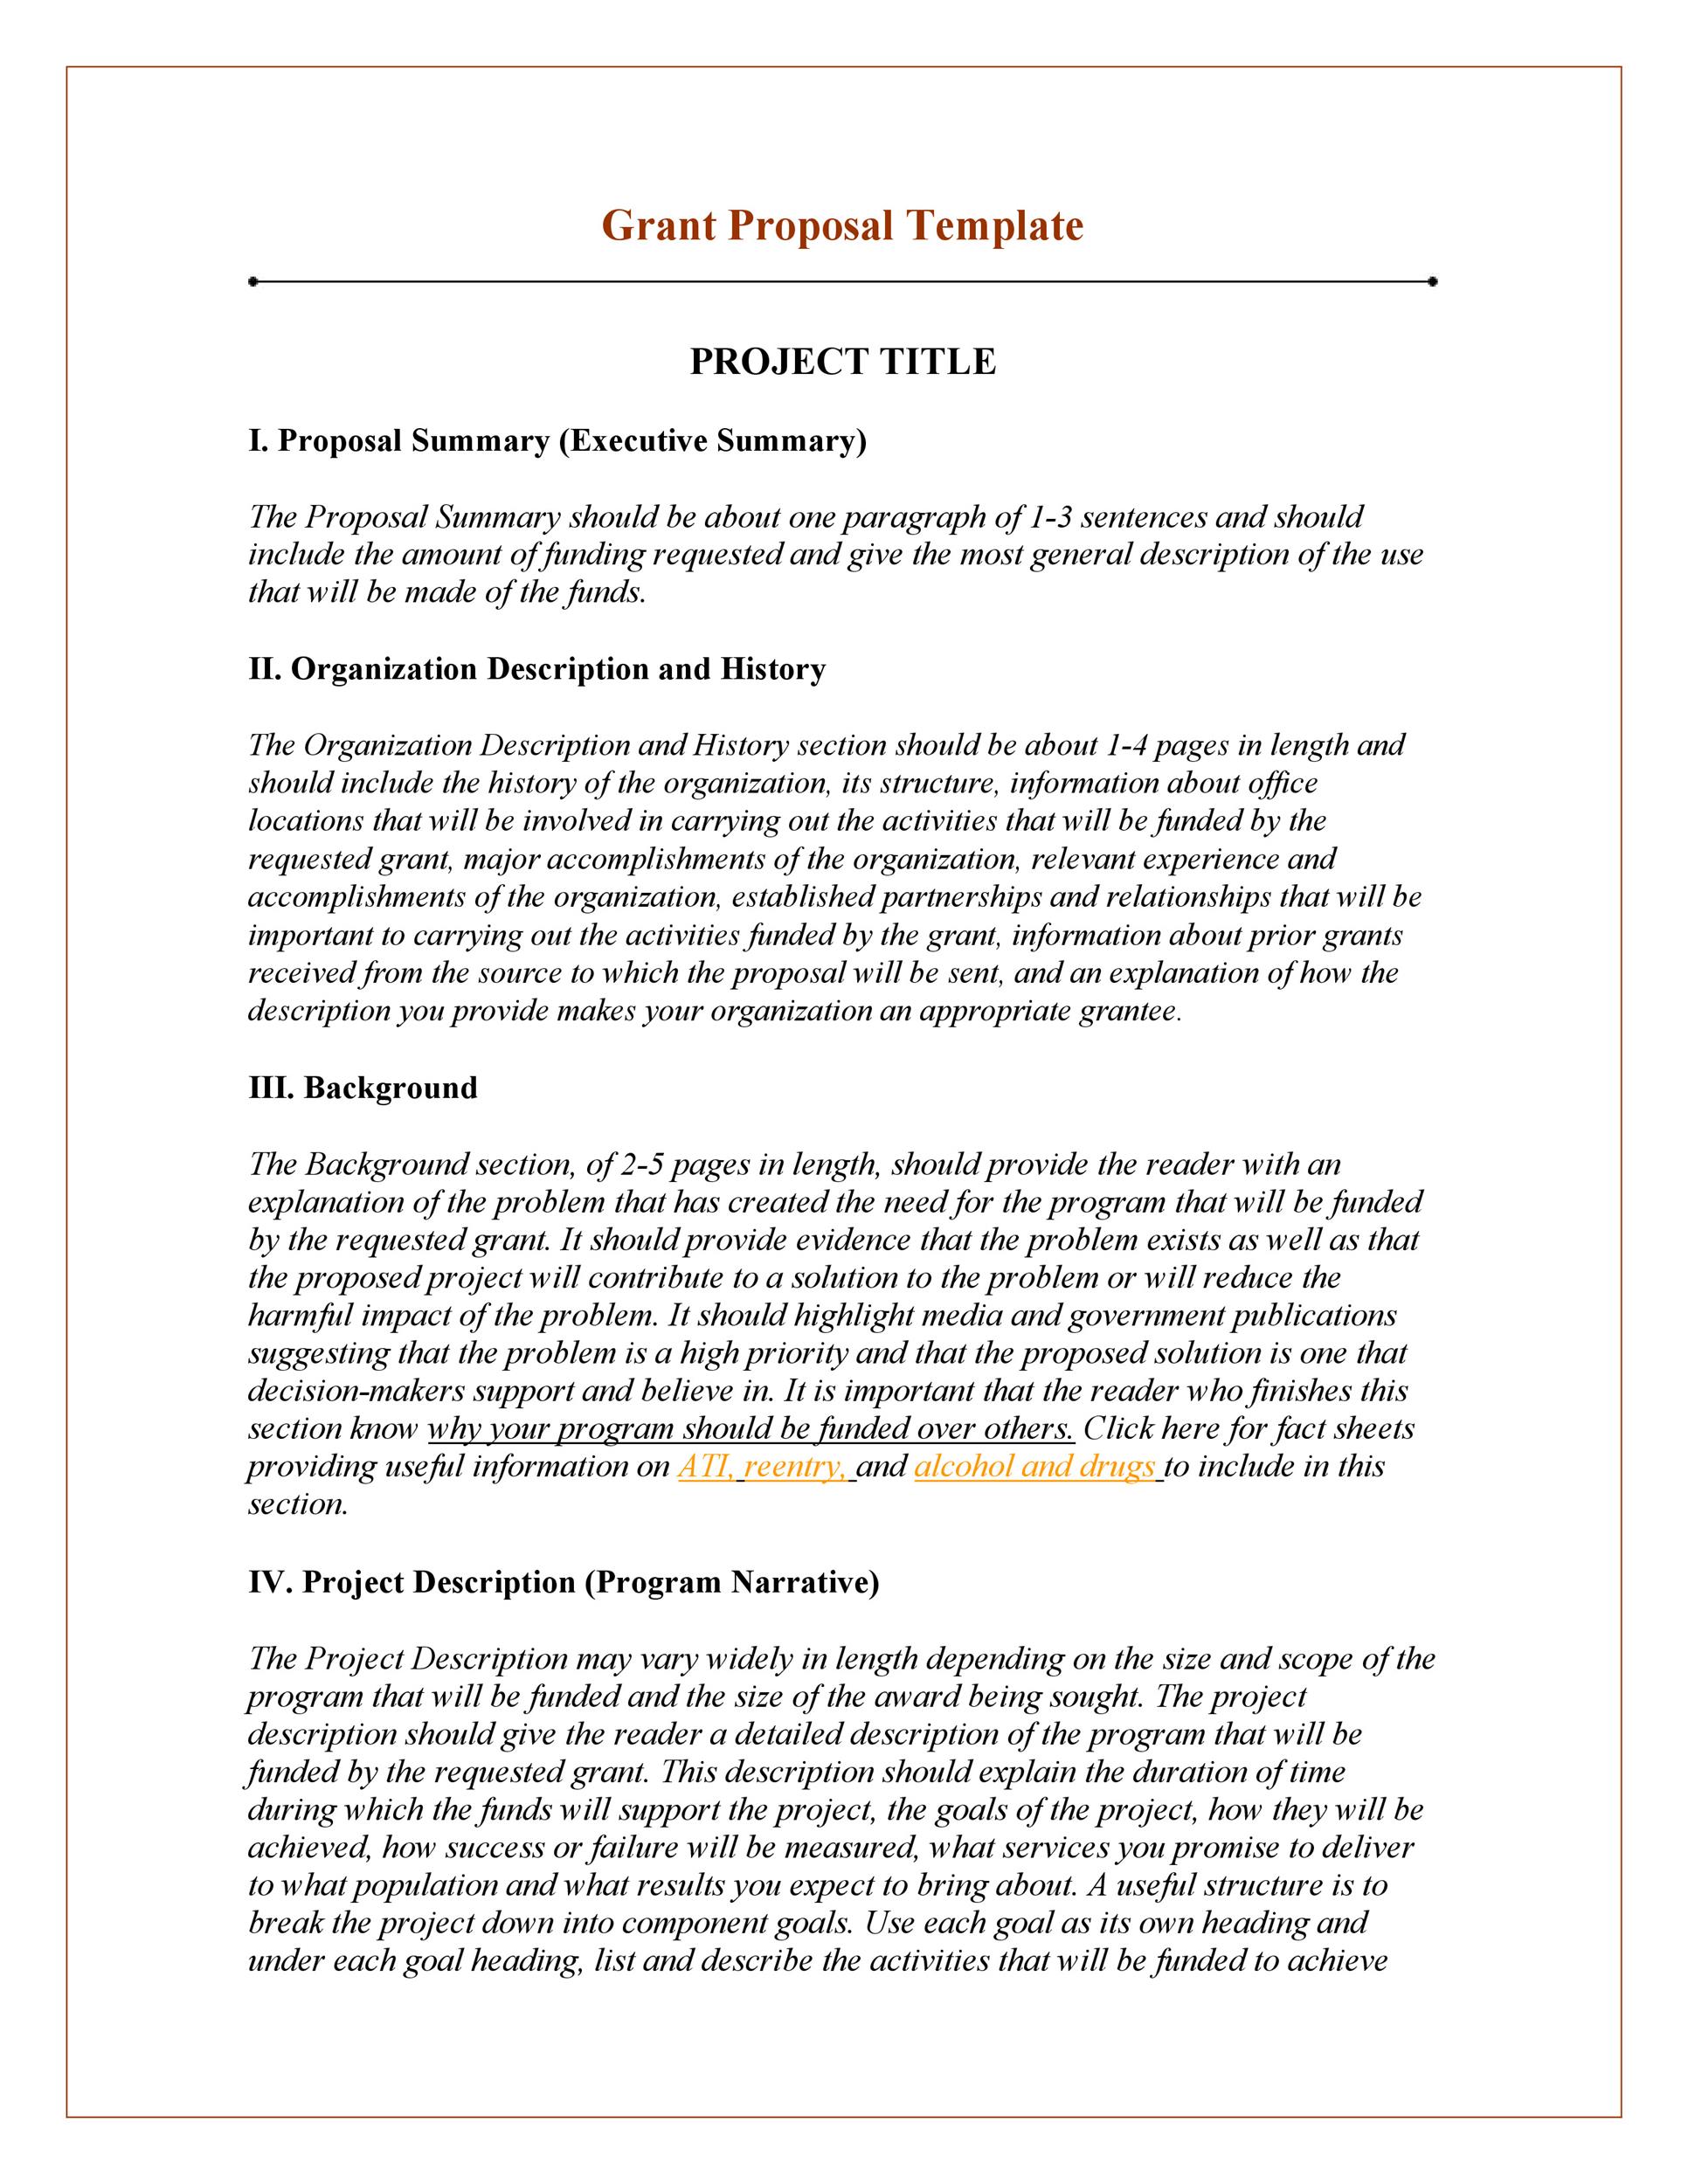 grant-funding-proposal-template